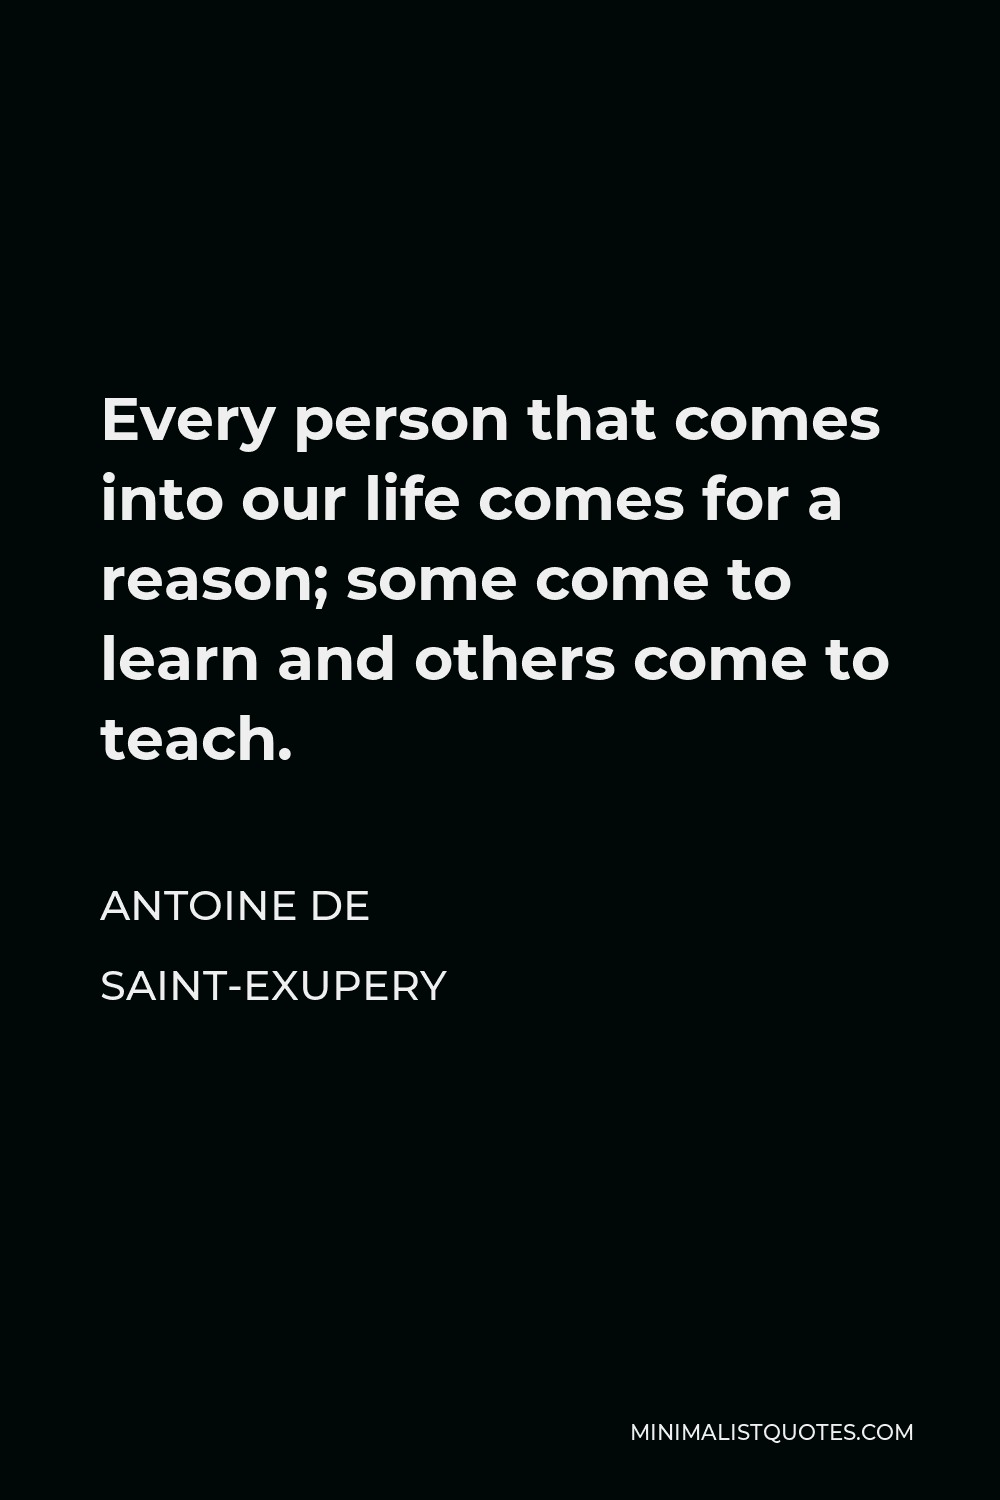 Antoine de Saint-Exupery Quote - Every person that comes into our life comes for a reason; some come to learn and others come to teach.